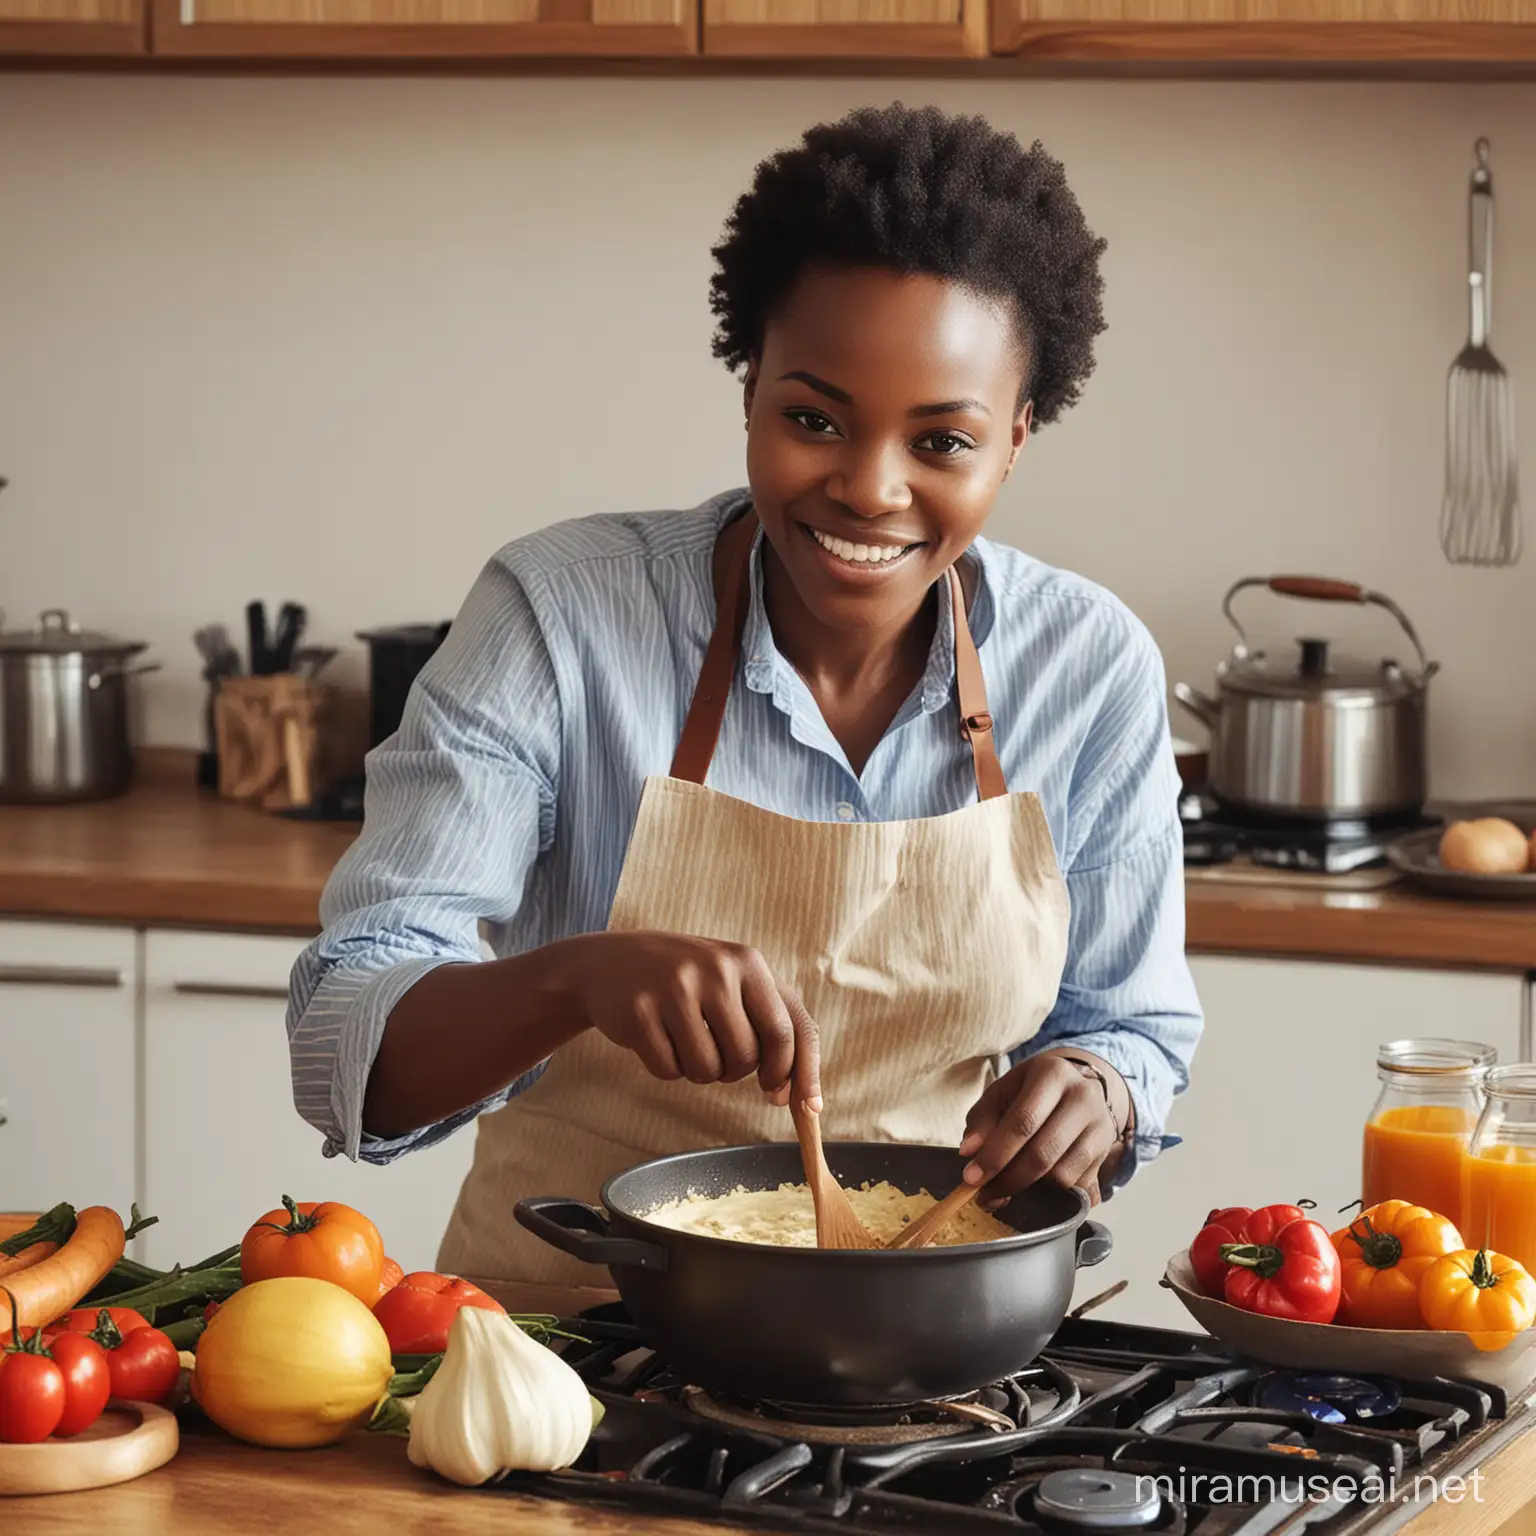 African Woman Cooking Traditional Cuisine with Authentic Flavors